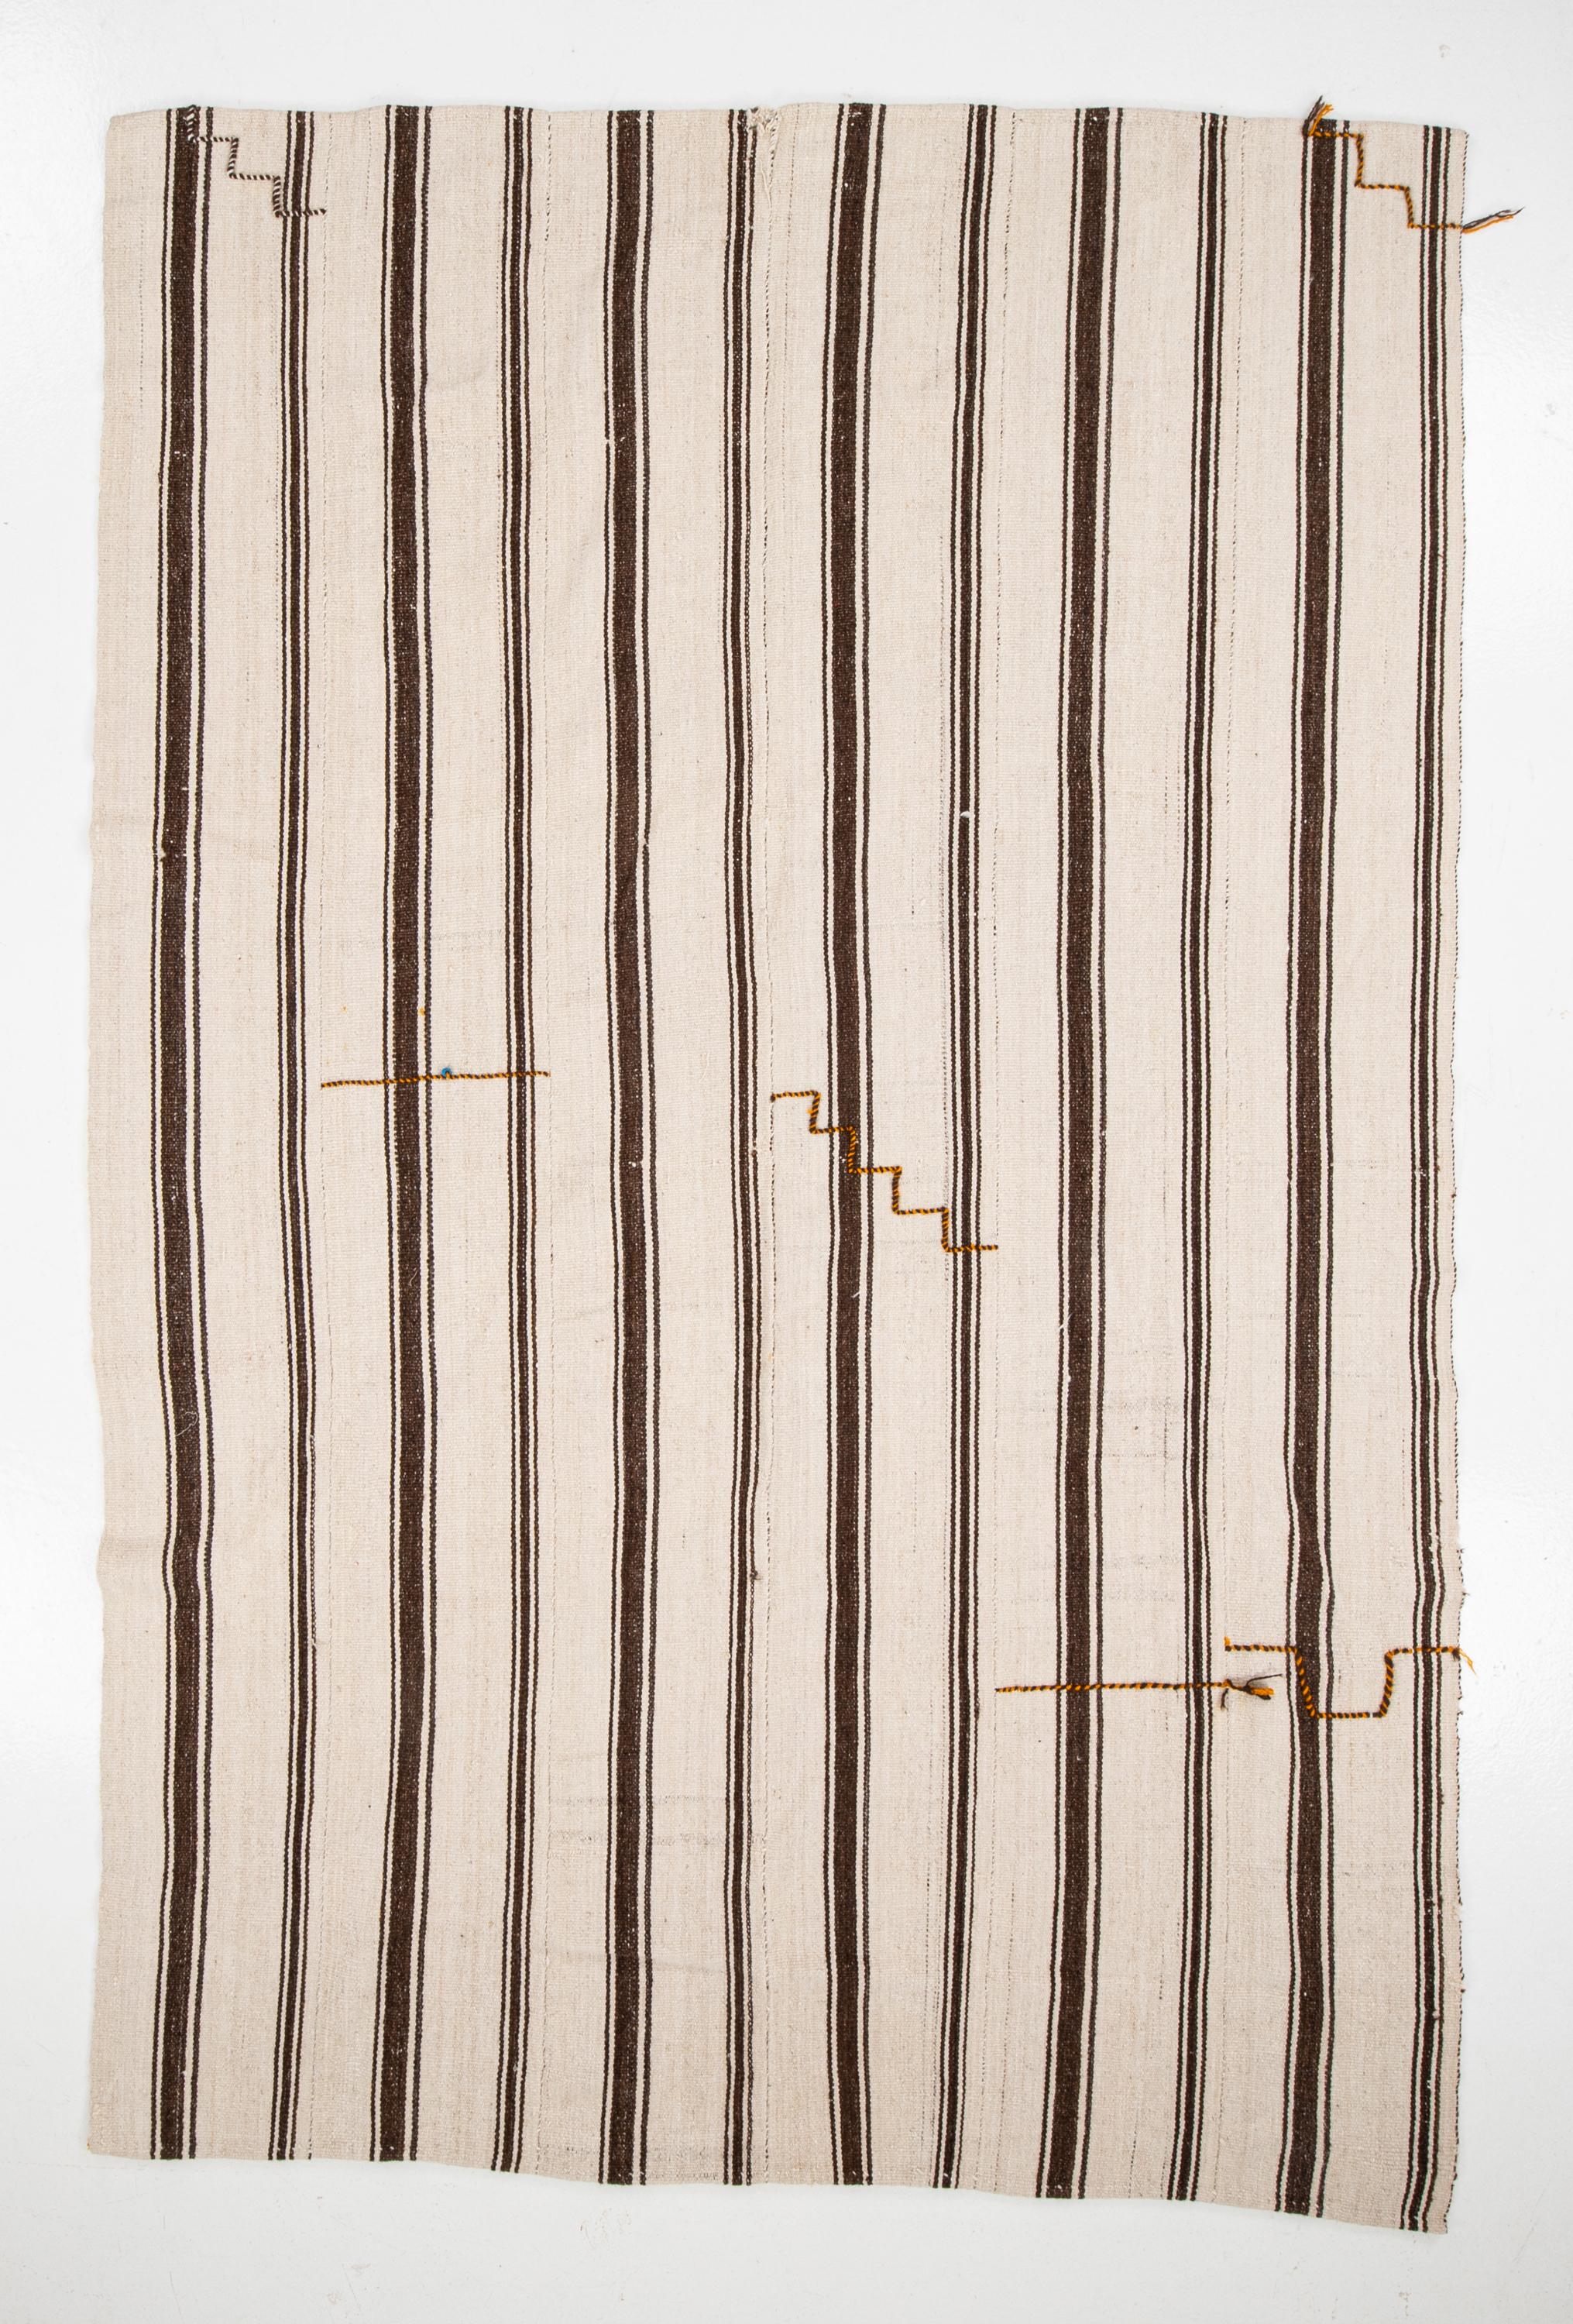 Wool Neutral Kilim from Central Anatolia, Turkey, 1960s For Sale